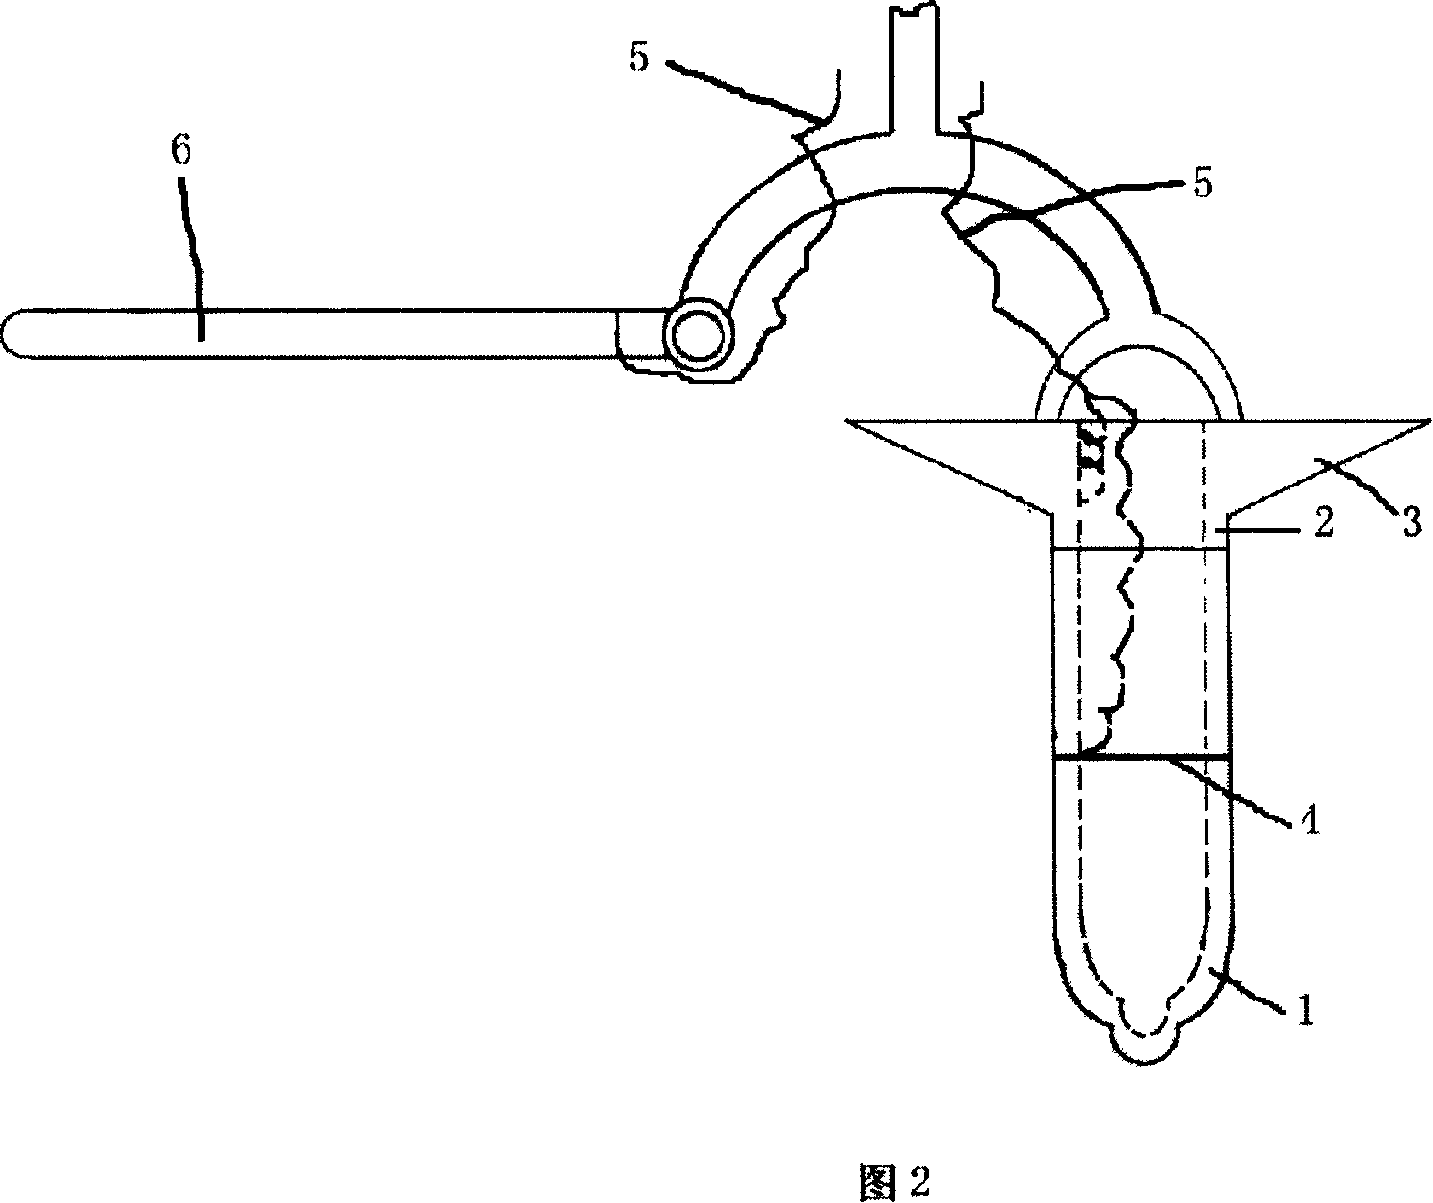 Method for preparing male condom having a self-standing skirt-shaped structure and products thereof